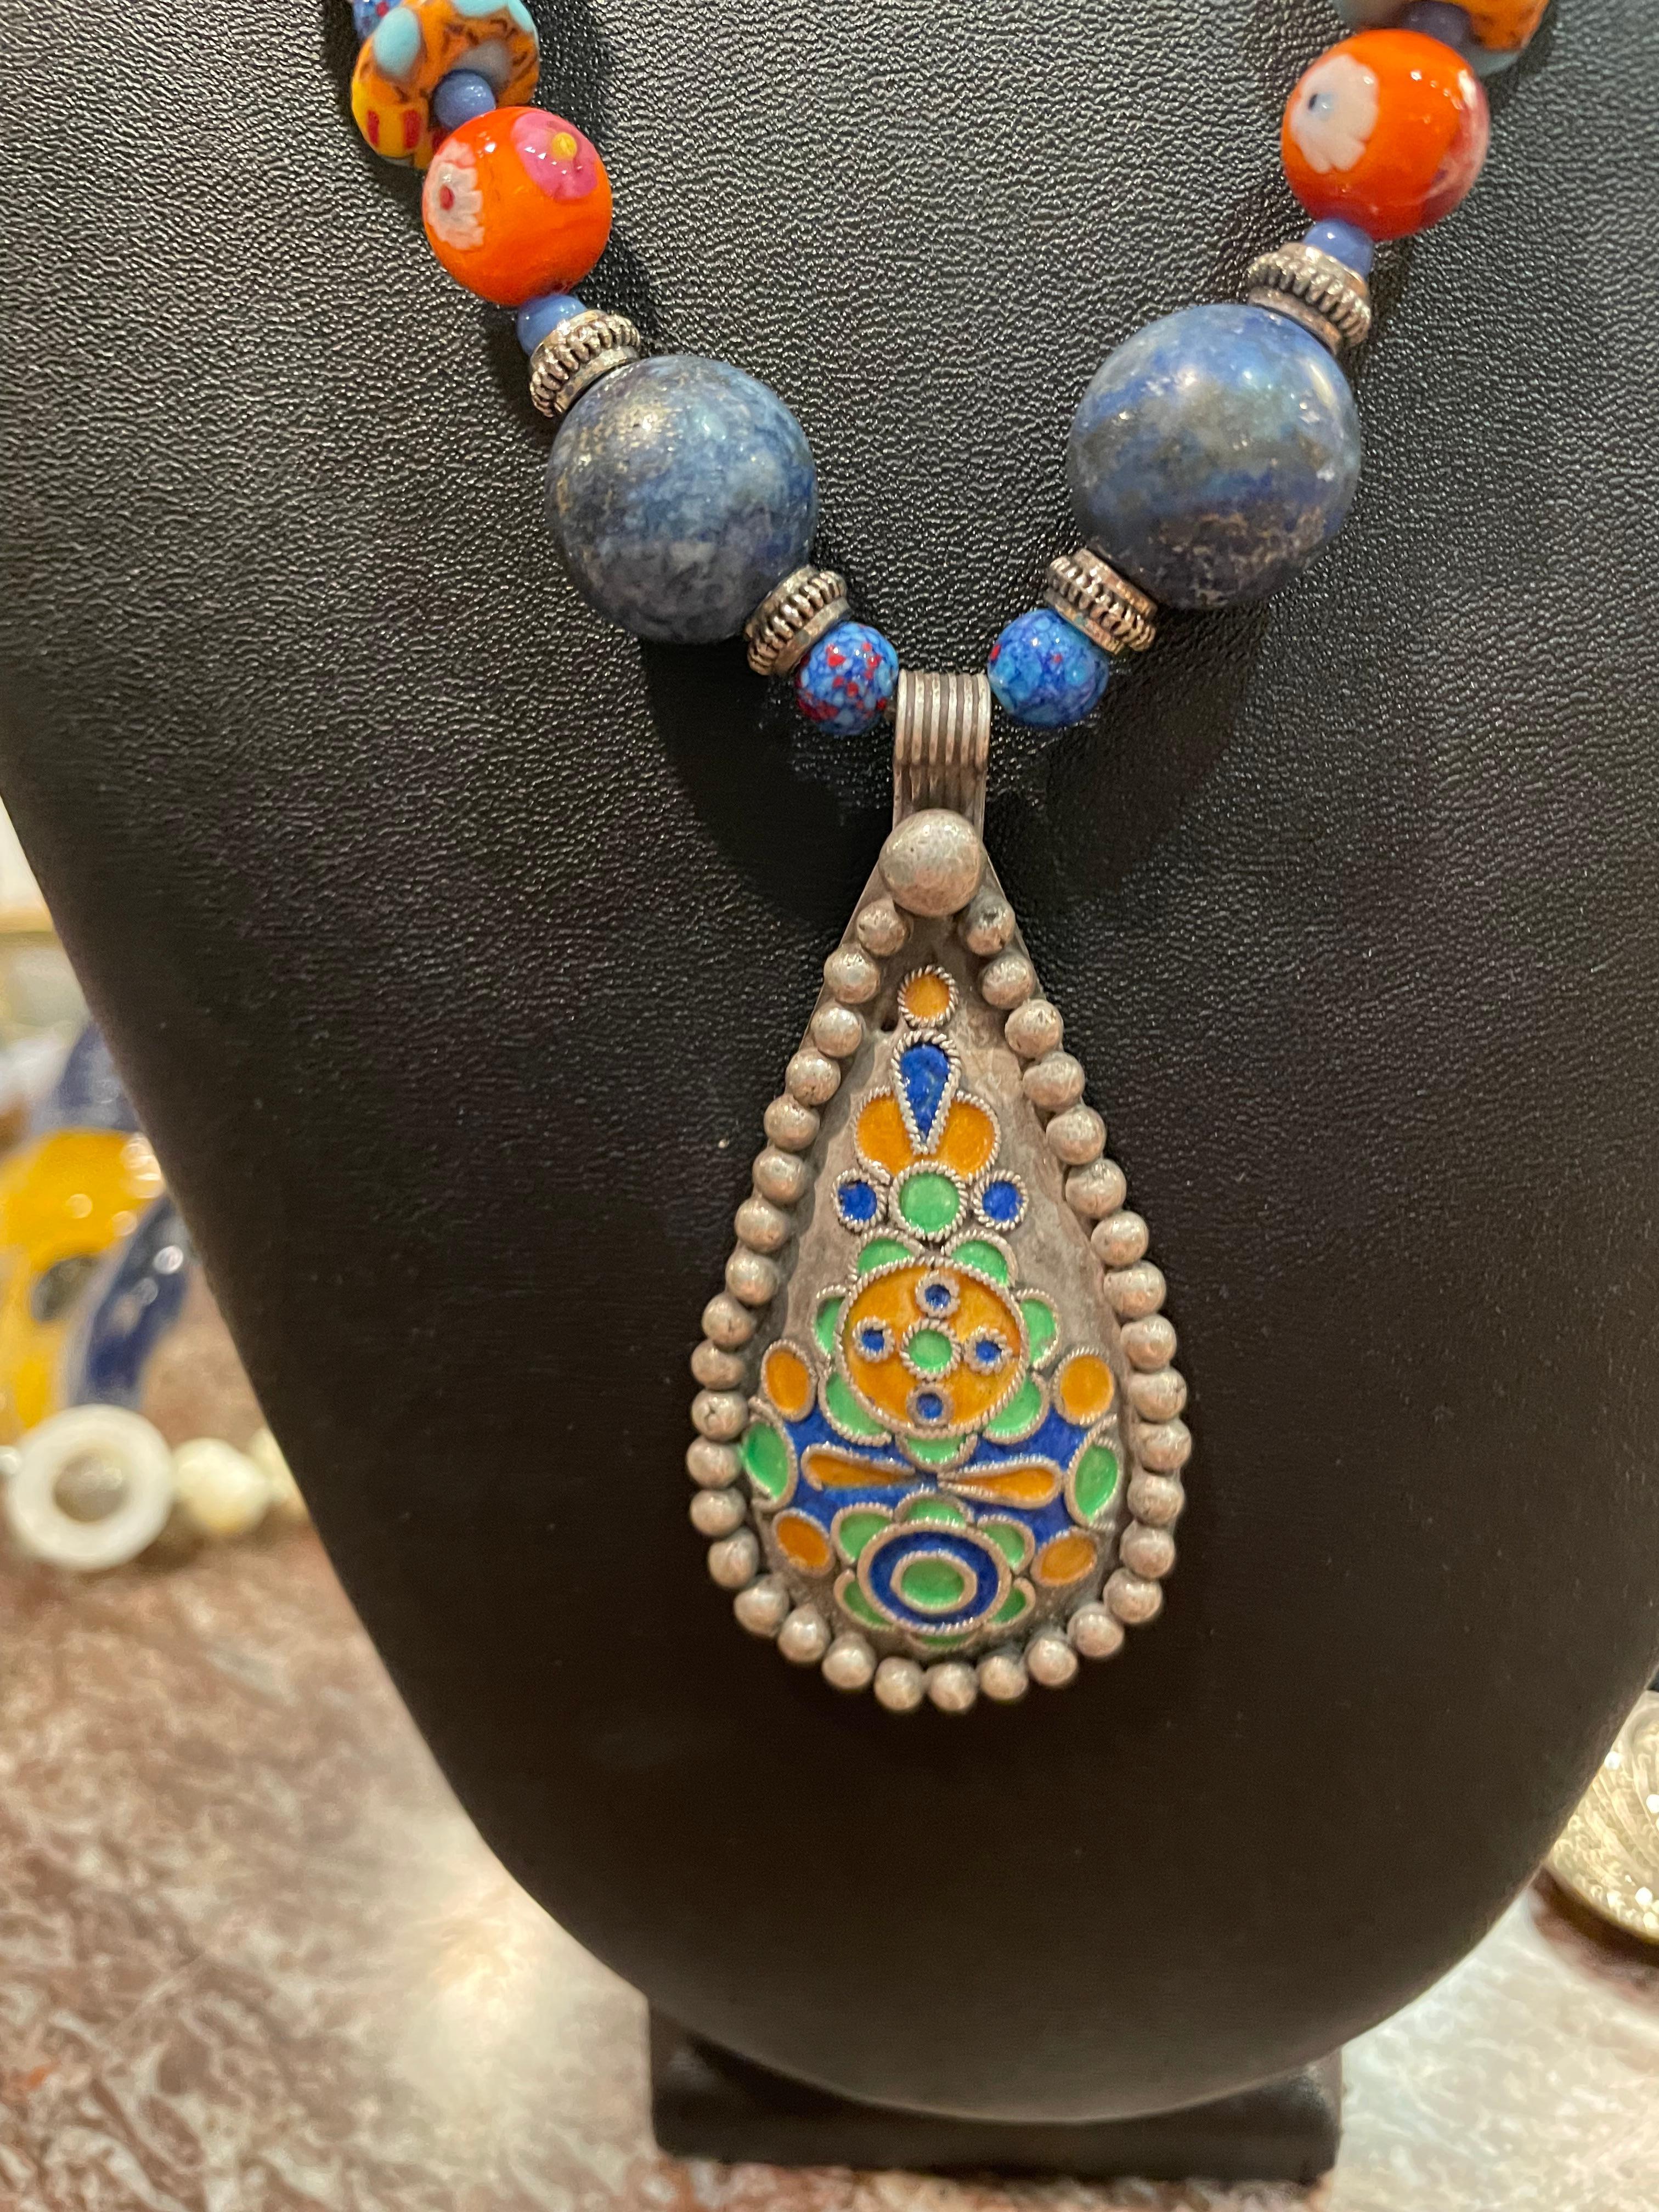 LB offers a handmade; one of a kind, stunning tribal necklace. I purchased this pendant in Morocco several years ago and it has hand applied enamel in green, blue, and gold. This pendant is completely handmade with silver based wire and granulation.